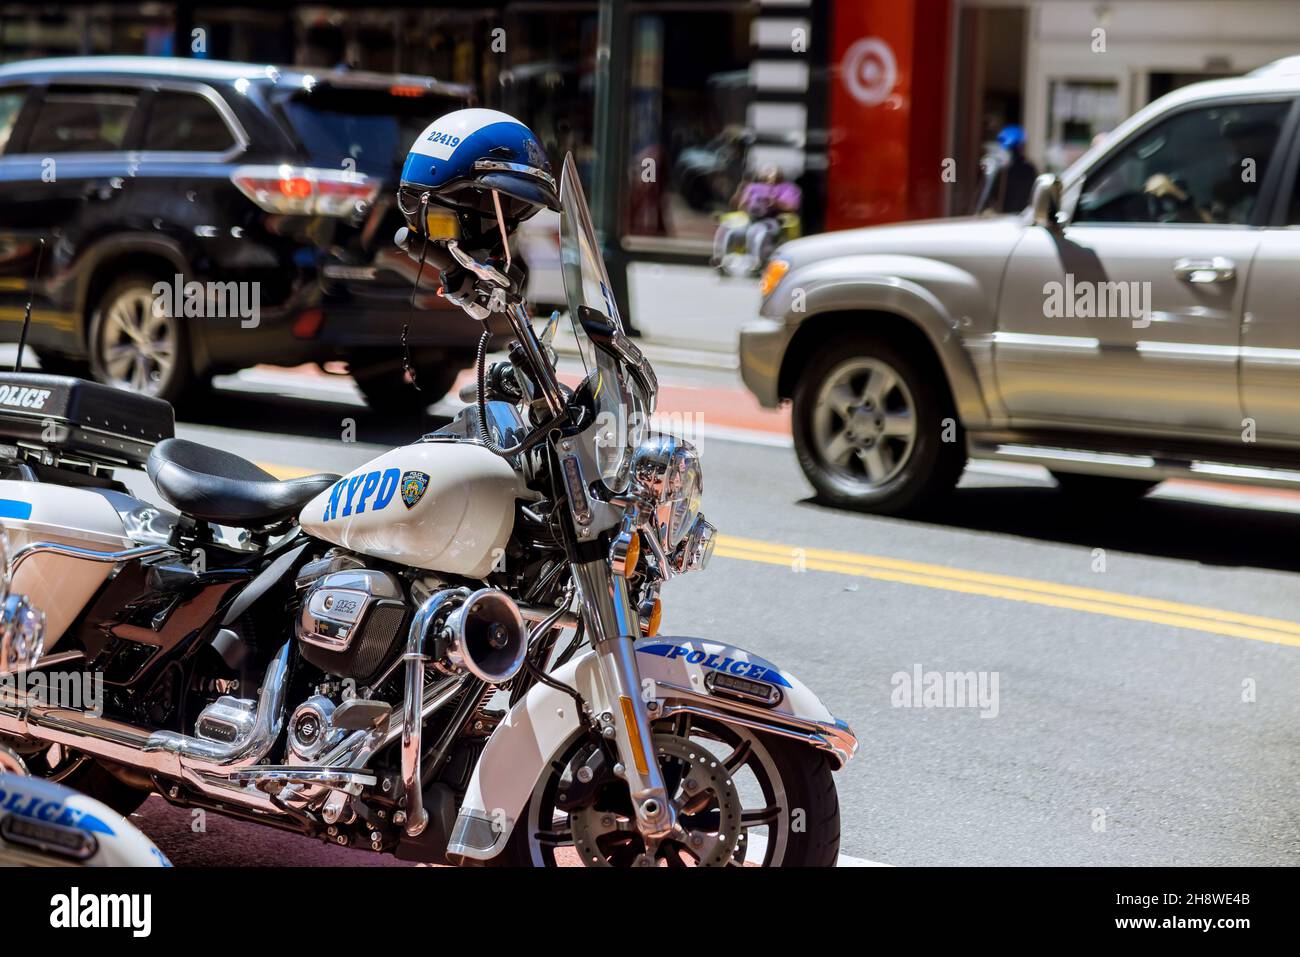 NYPD motorcycles parked in the streets with police New York City Stock Photo